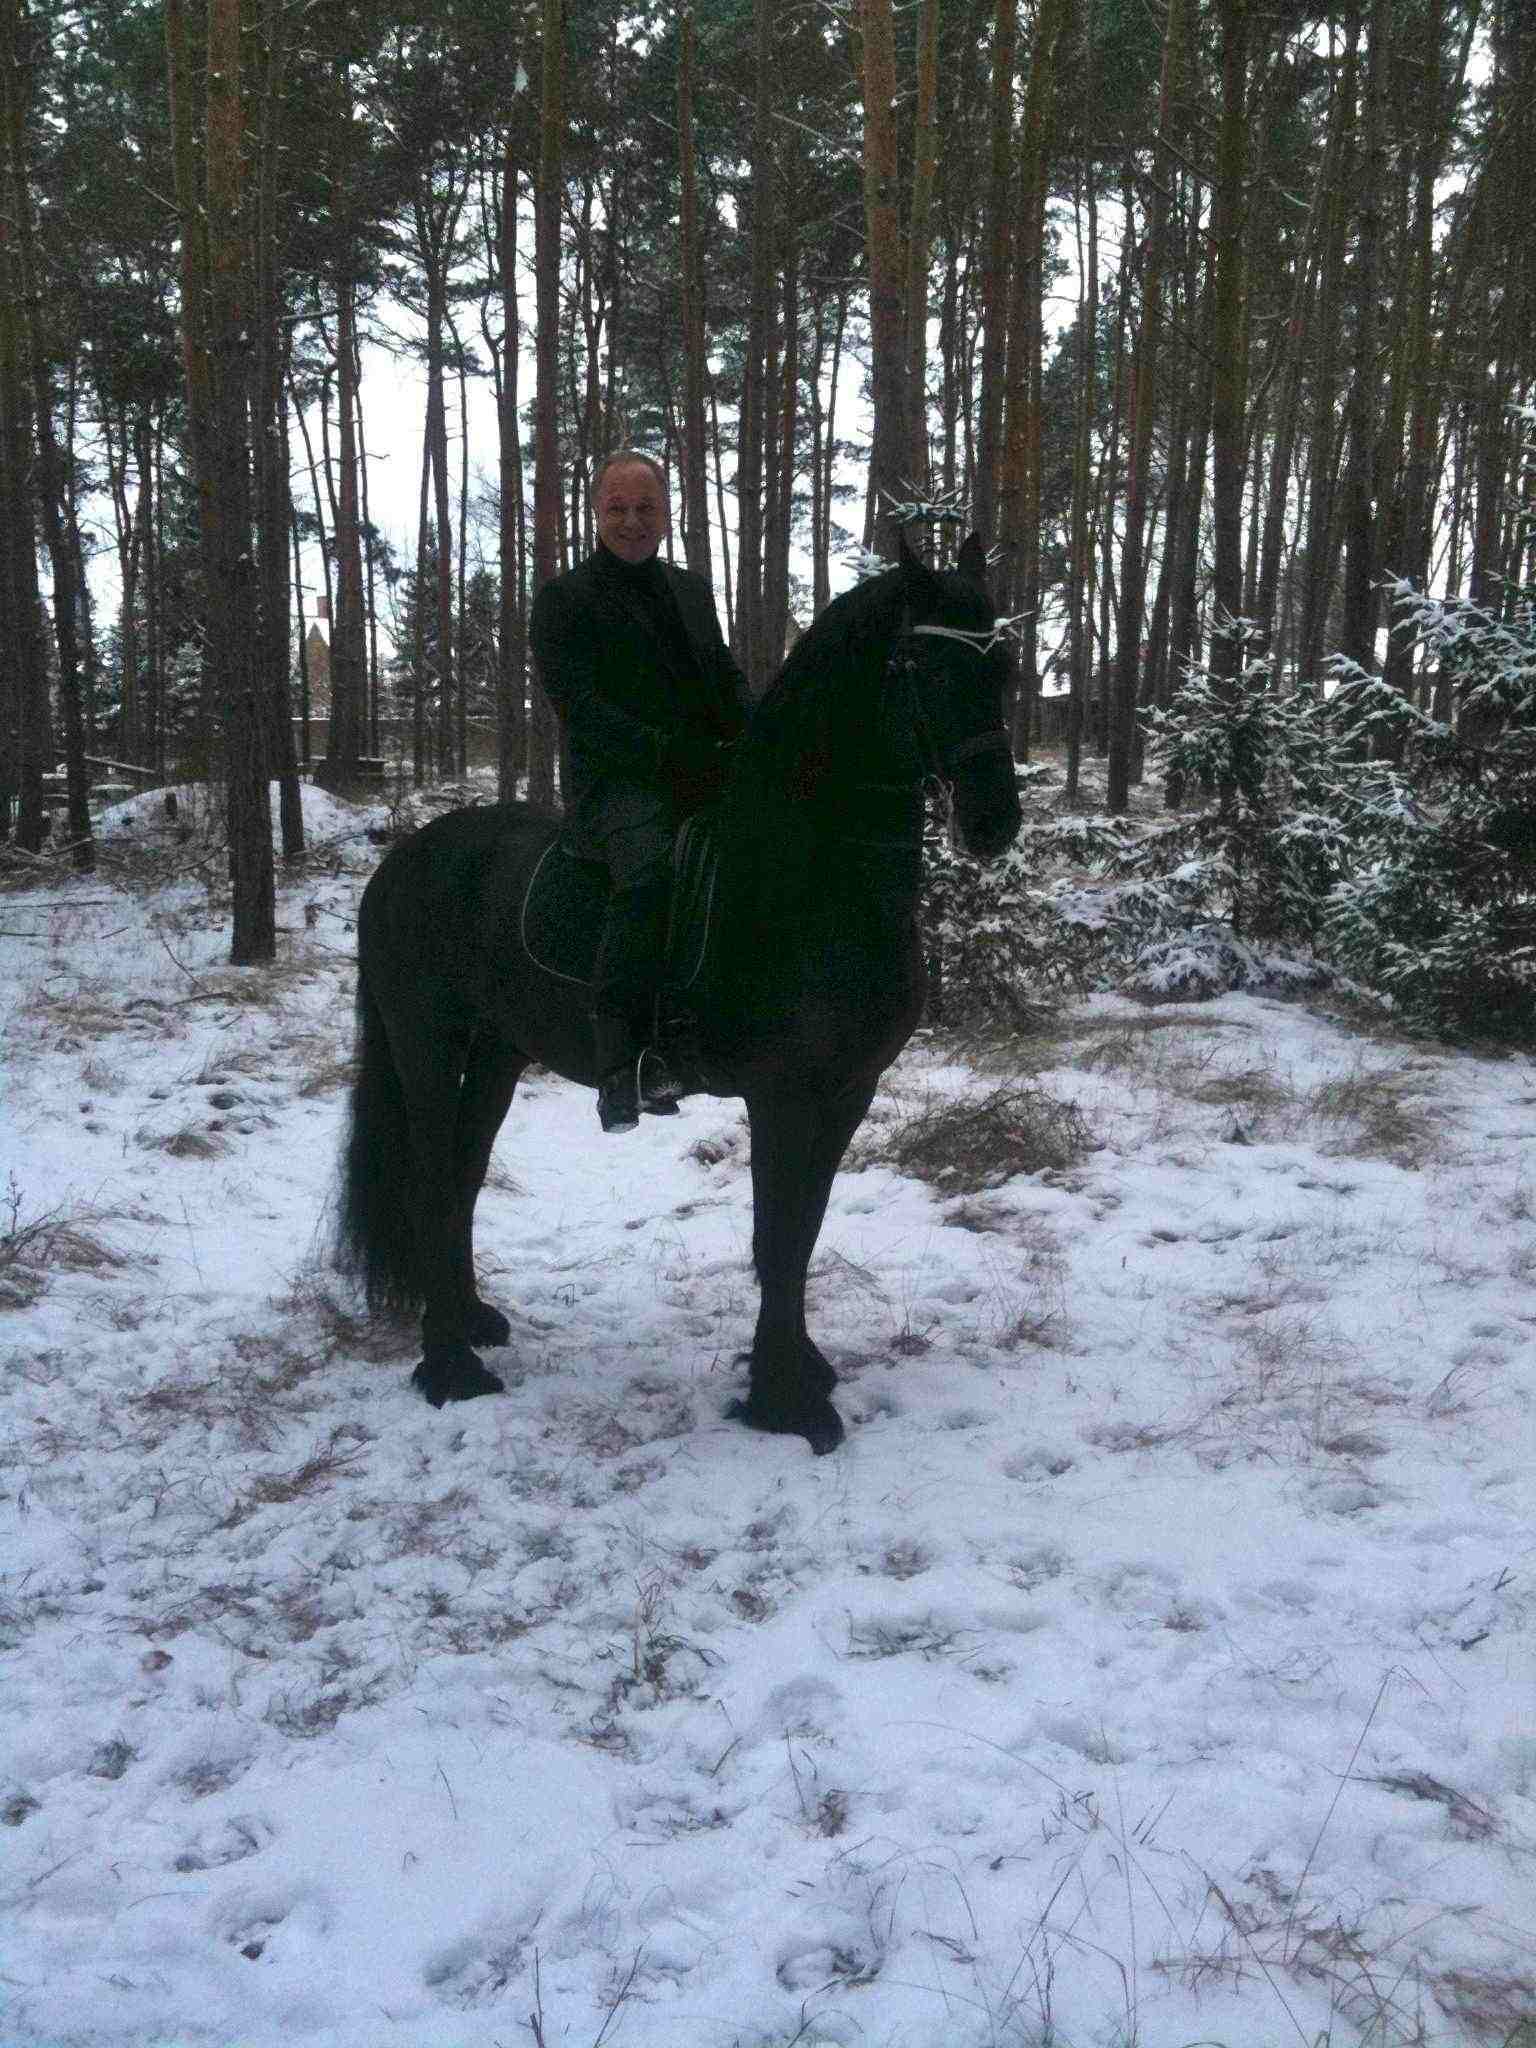 riding through the snowy forests of Berlin-Brandenburg in the Winter of 2013